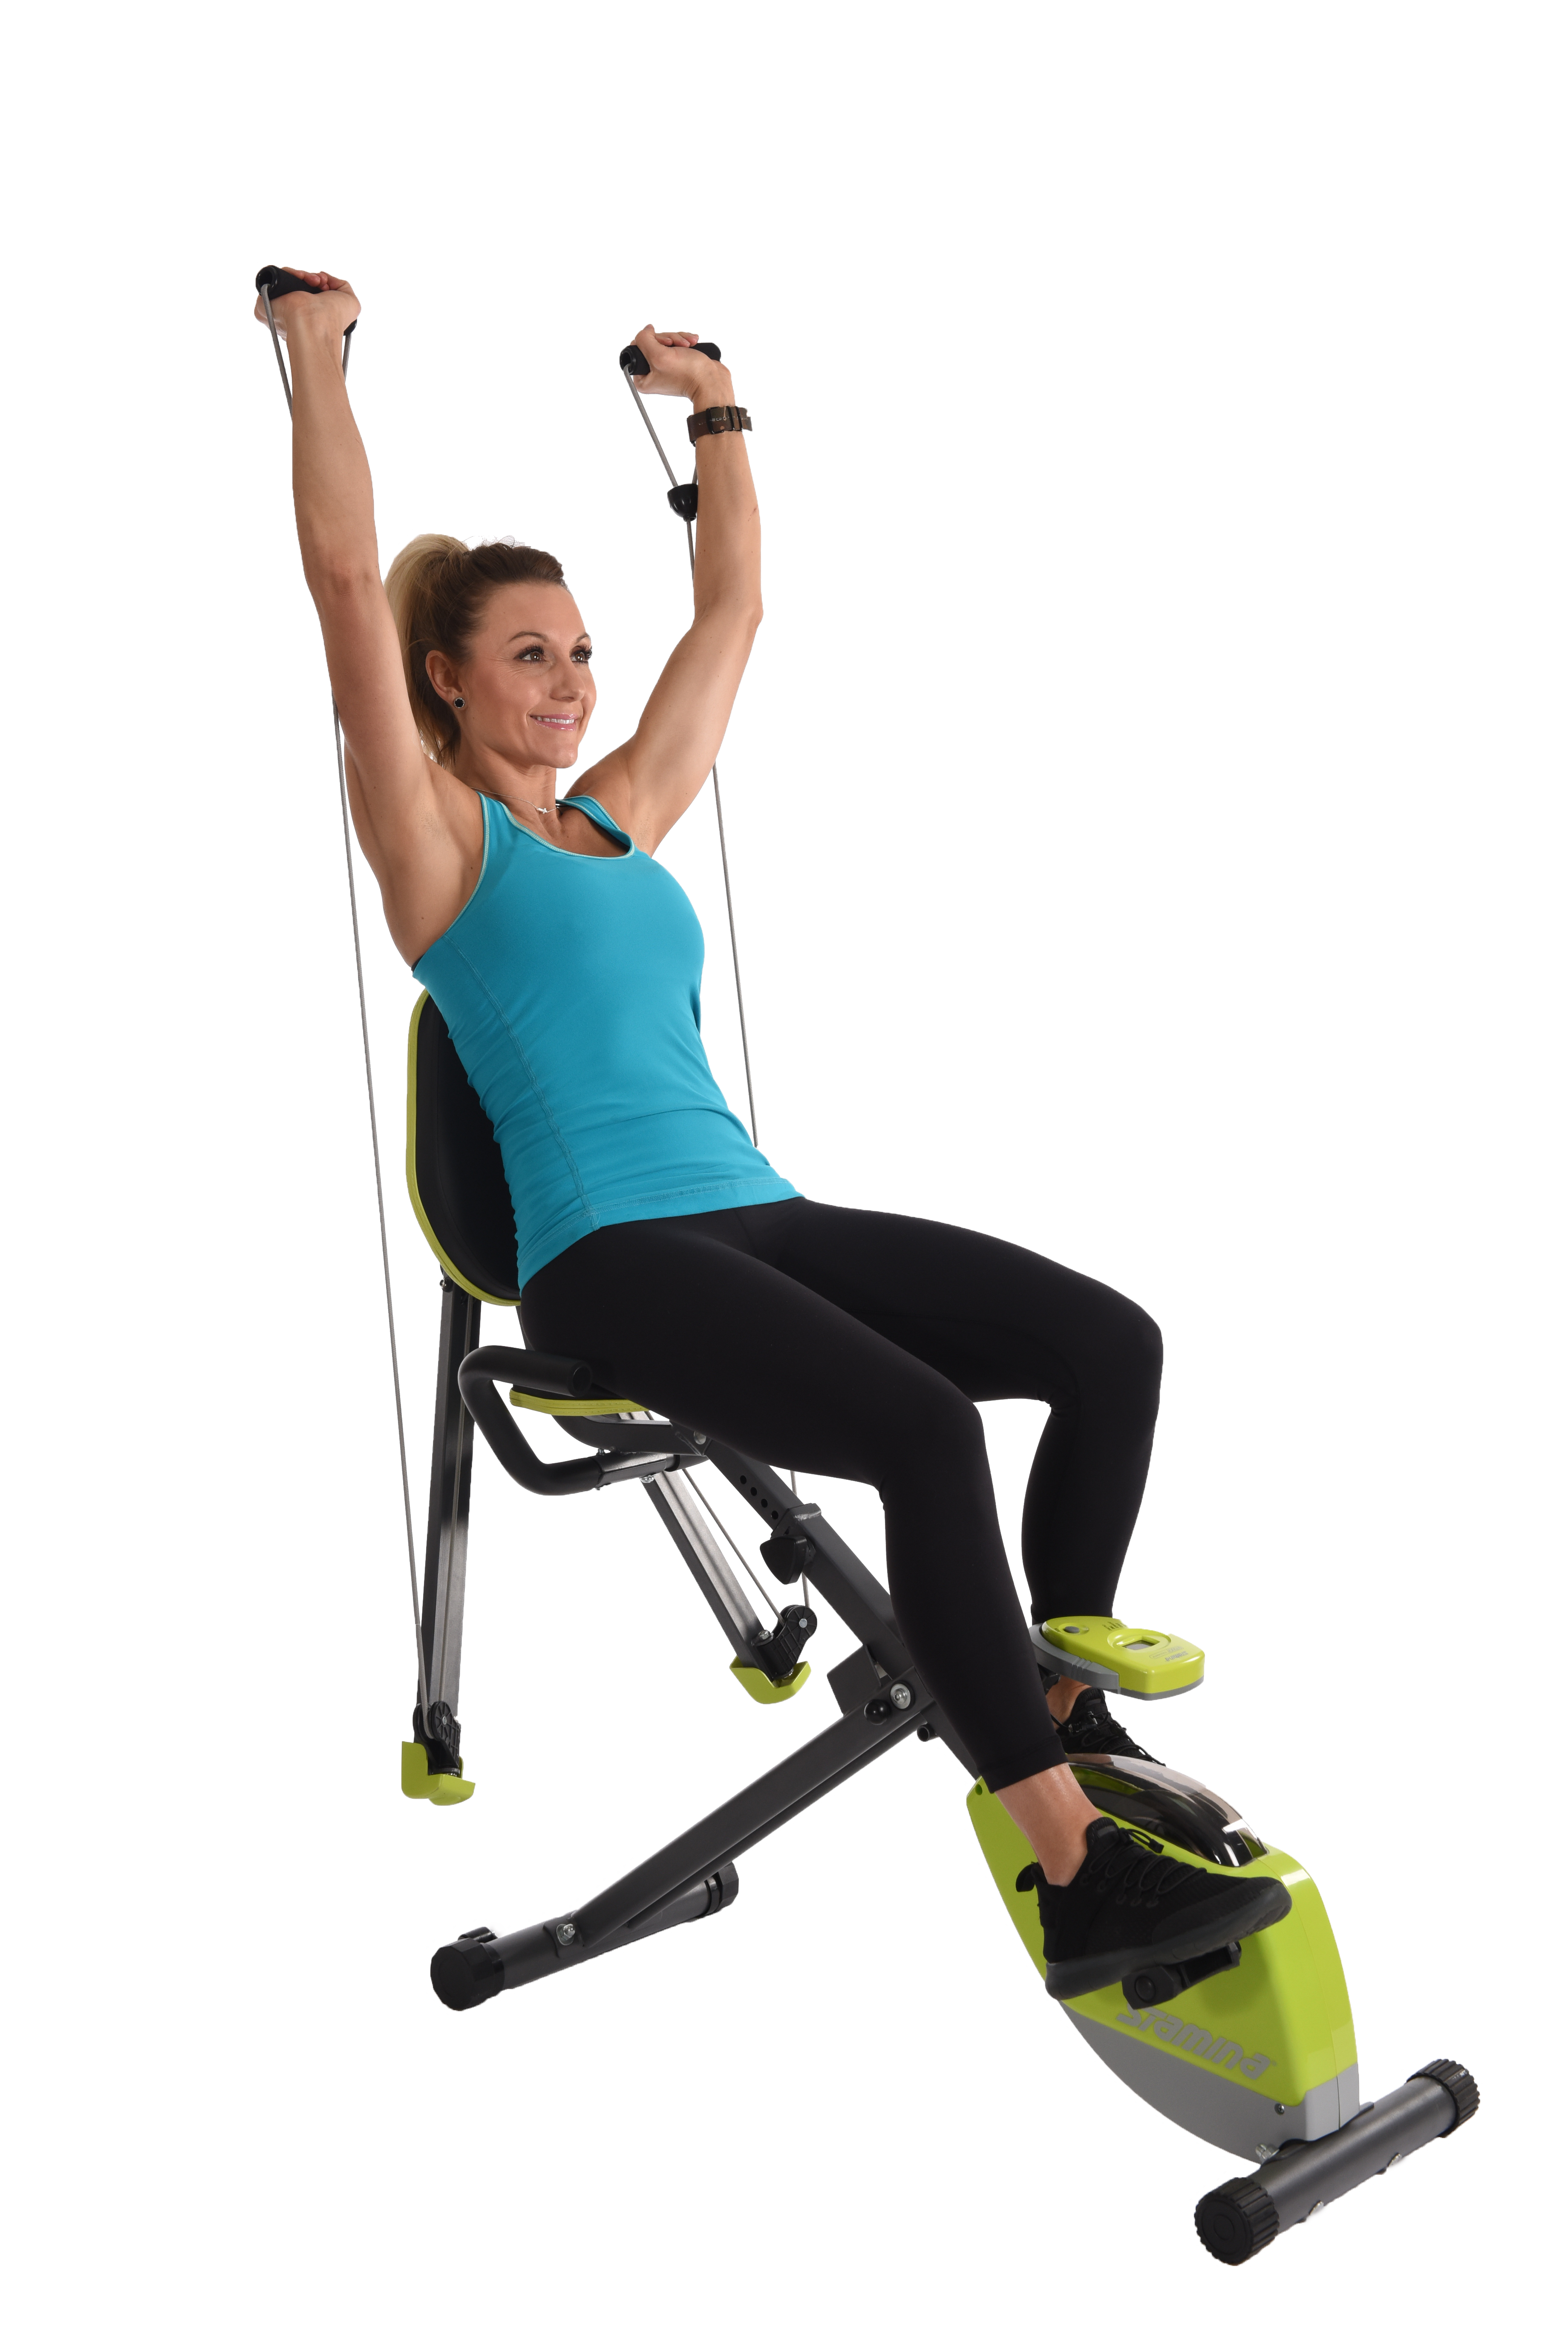 Performing incline press on Stamina Wonder Exercise Bike With Strength System.